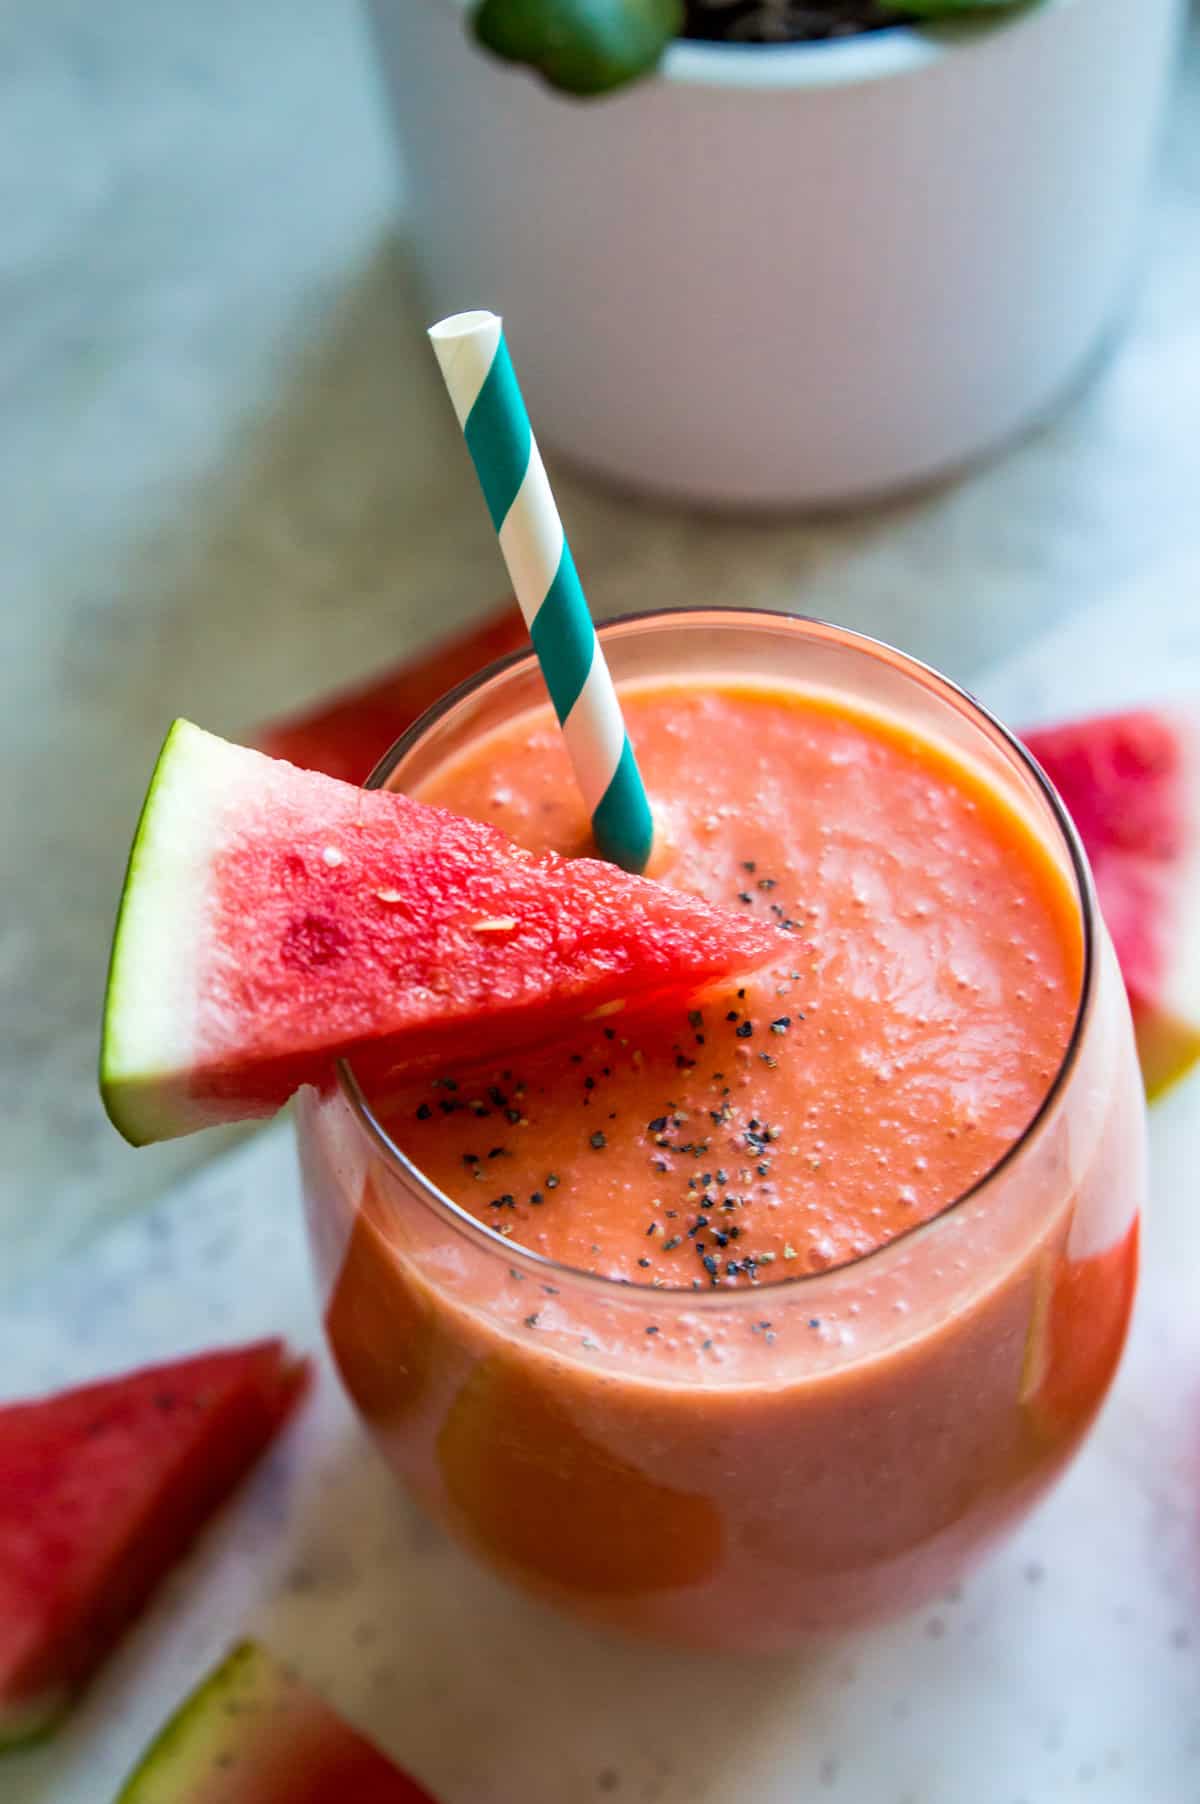 A watermelon banana smoothie in a glass with a straw and a small piece of watermelon on top.